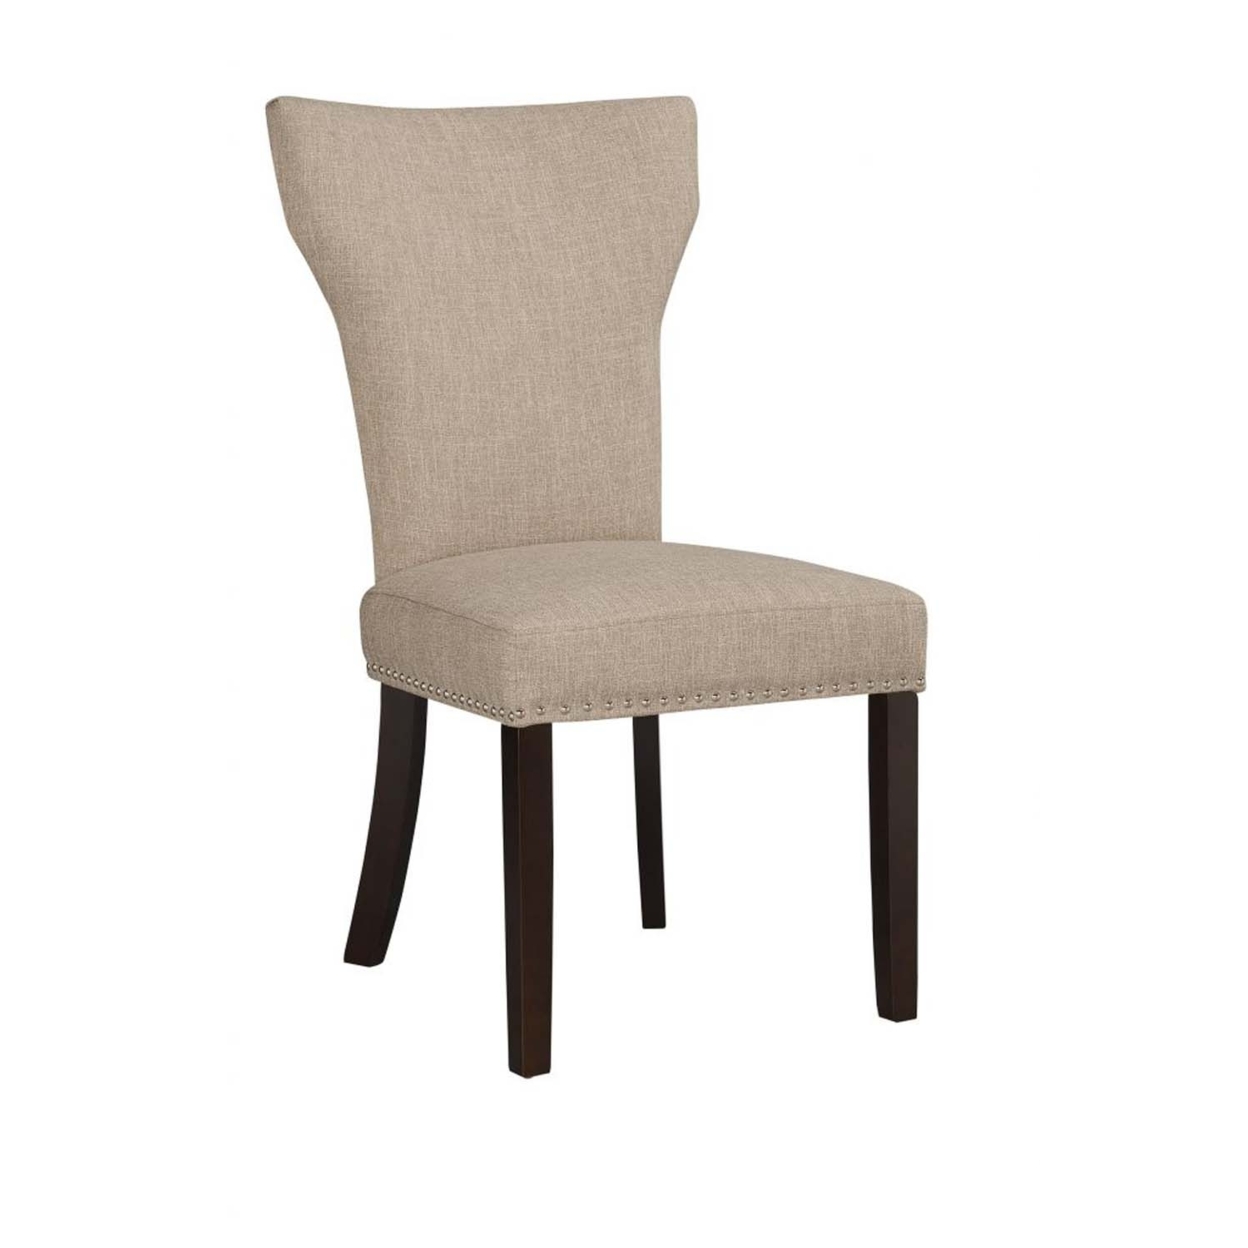 Fabric Upholstered Side Chair With Wingback Design, Set Of 2, Oatmeal Brown- Saltoro Sherpi